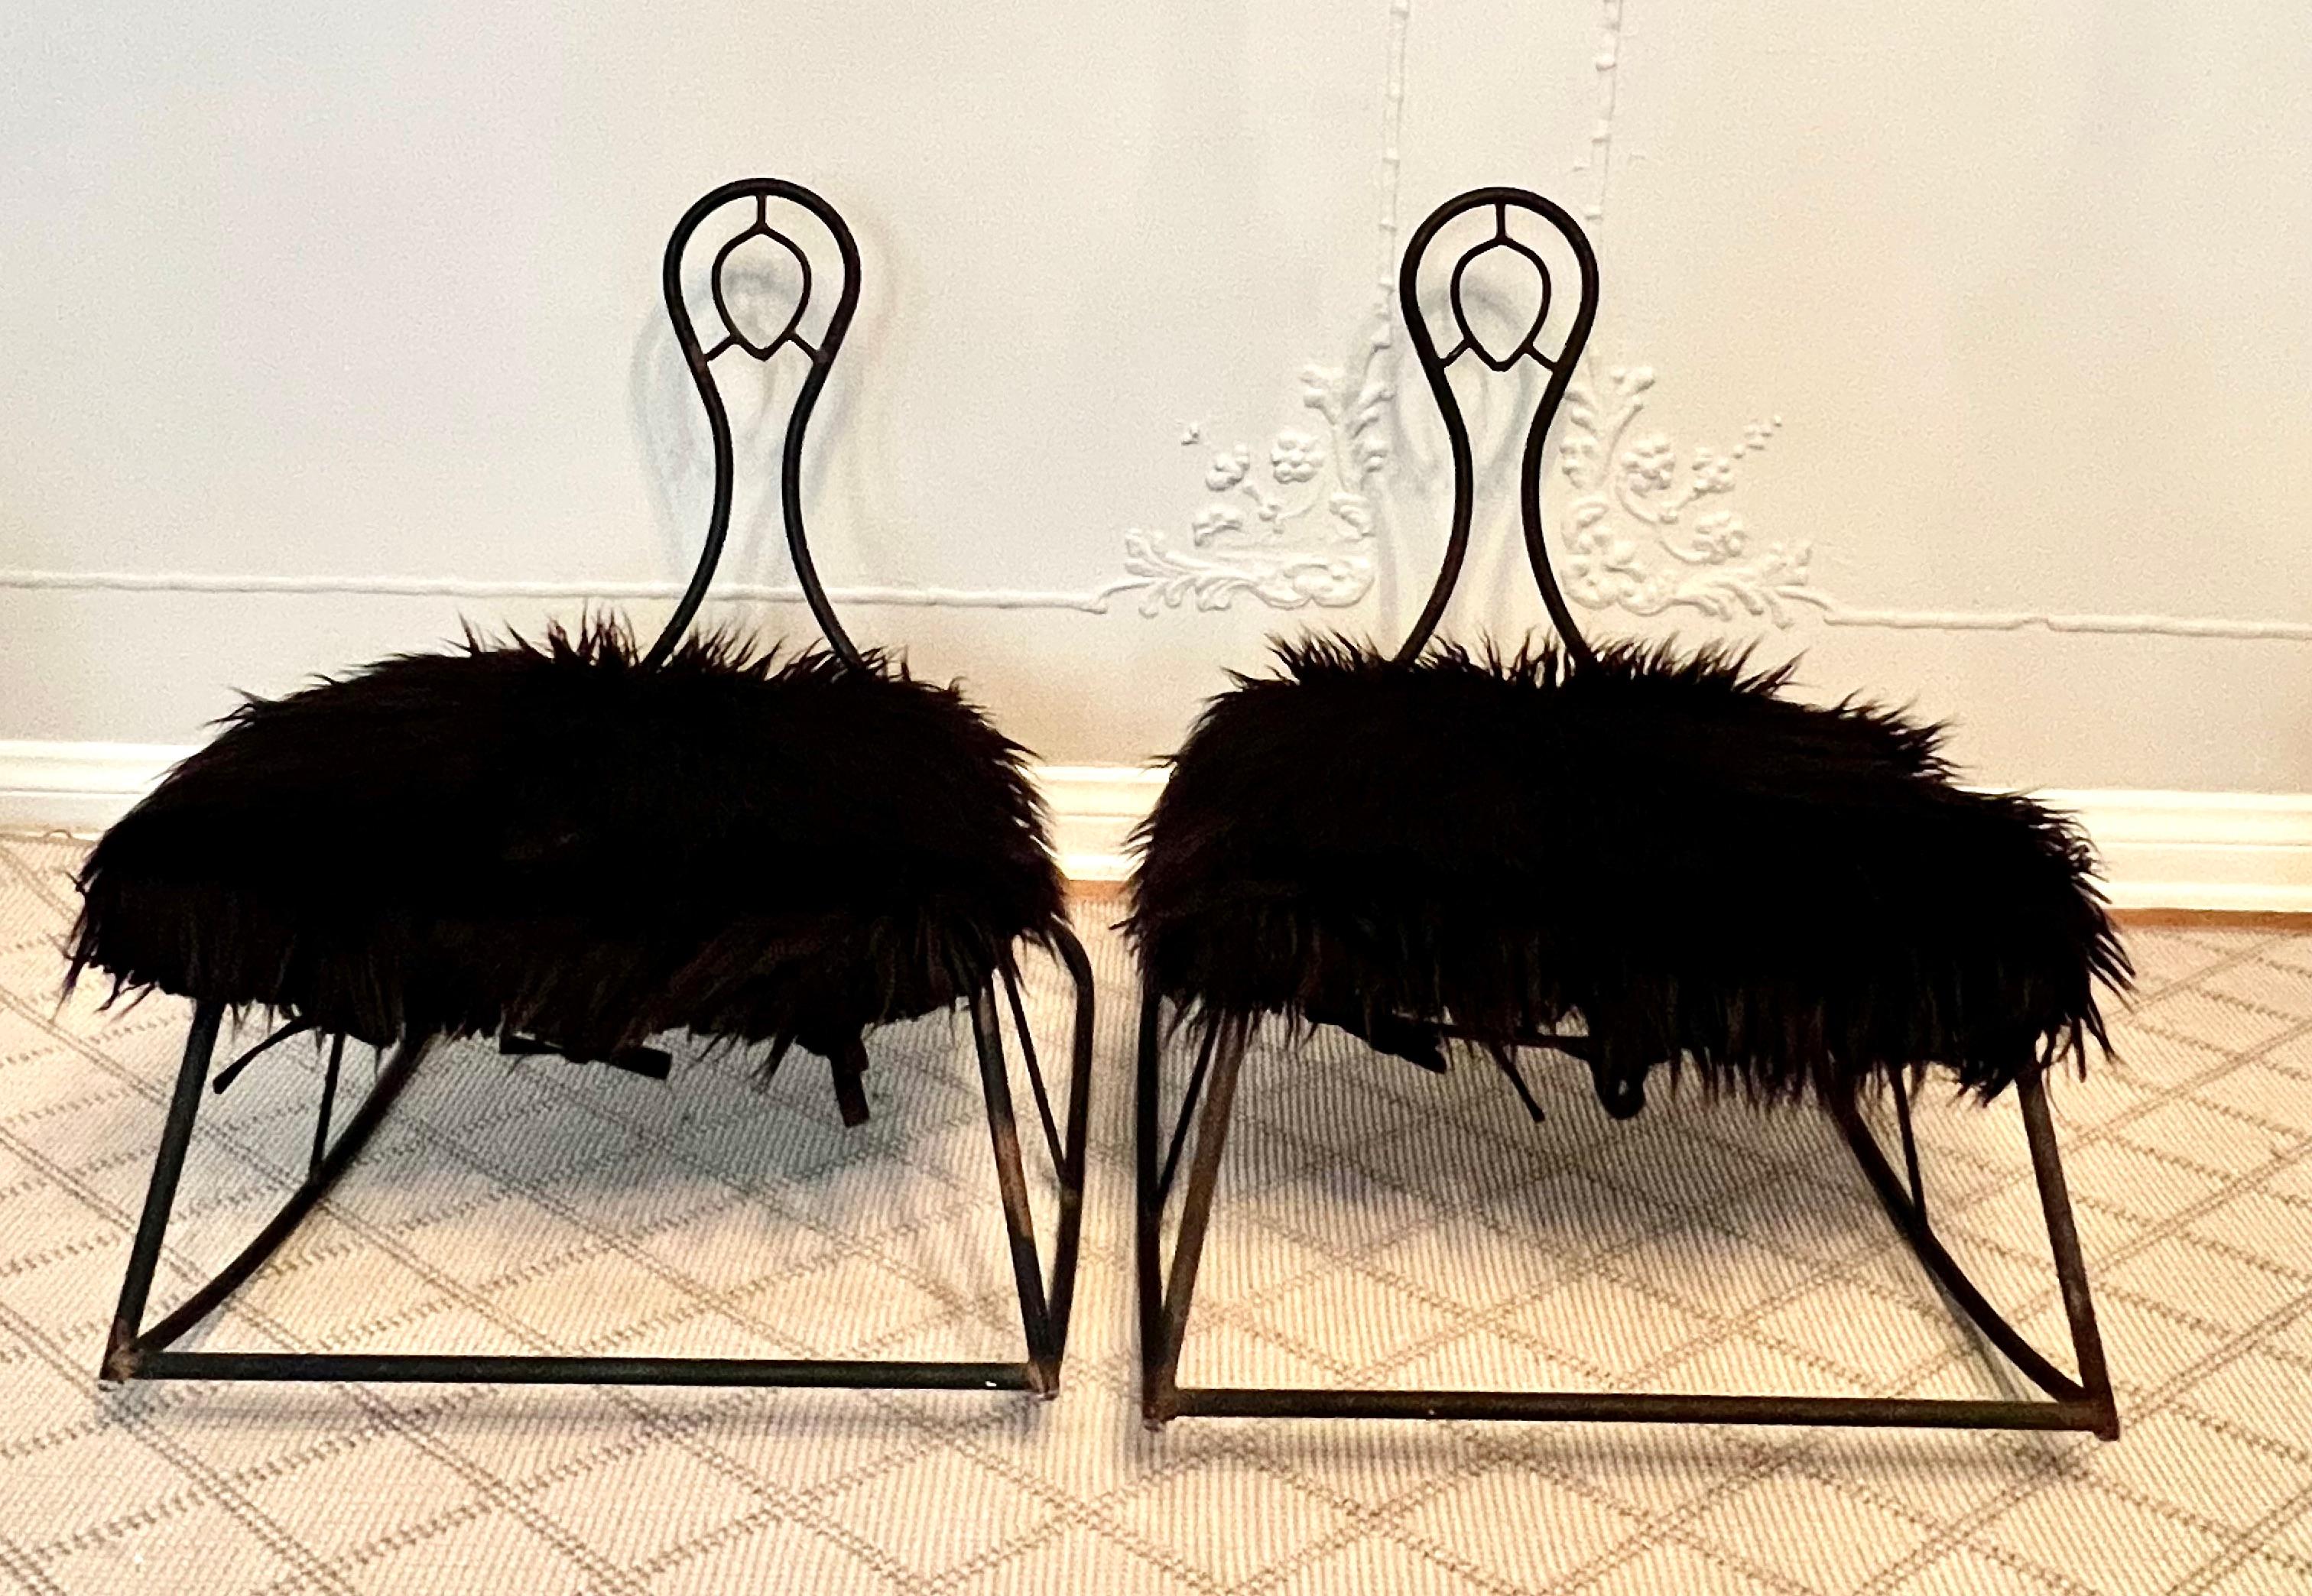 A great pair of metal rockers with a very architectural design and look.  The pair are a compliment to many rooms and would work especially well in a child room or play area.   

The seat cushions are made of faux Mongolian fur and give the rockers